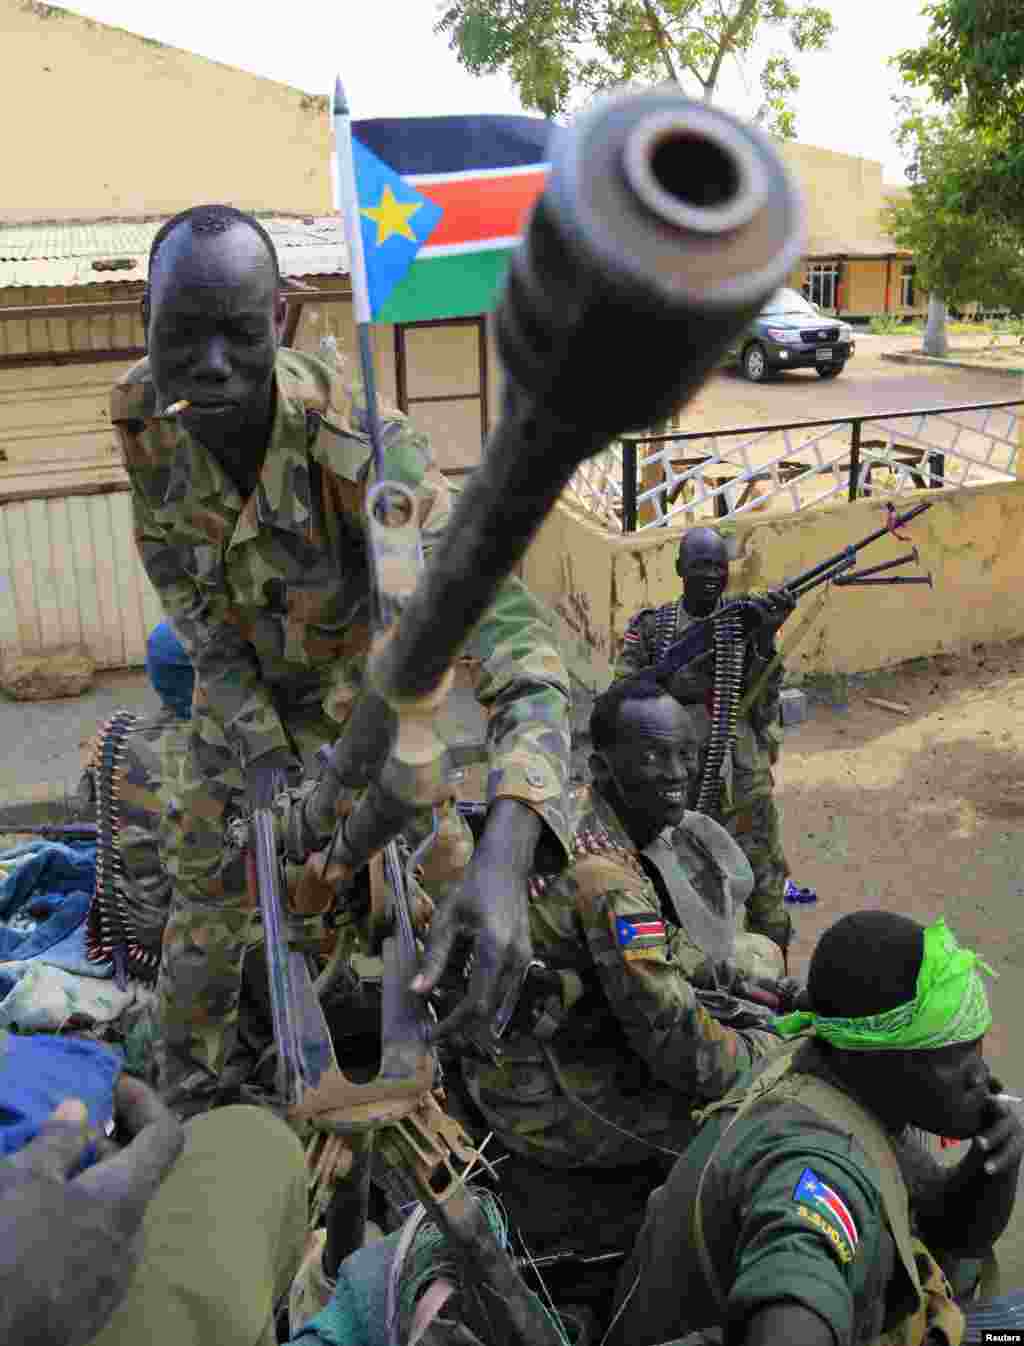 A South Sudan army soldier stands next to a machine gun mounted on a truck in Malakal town, 497km (298 miles) northeast of capital Juba, December 30, 2013 a few days after retaking the town from rebel fighters. Rebel forces said Tuesday, Jan. 14, that they had retaken Malakal after days of clashes with government troops.